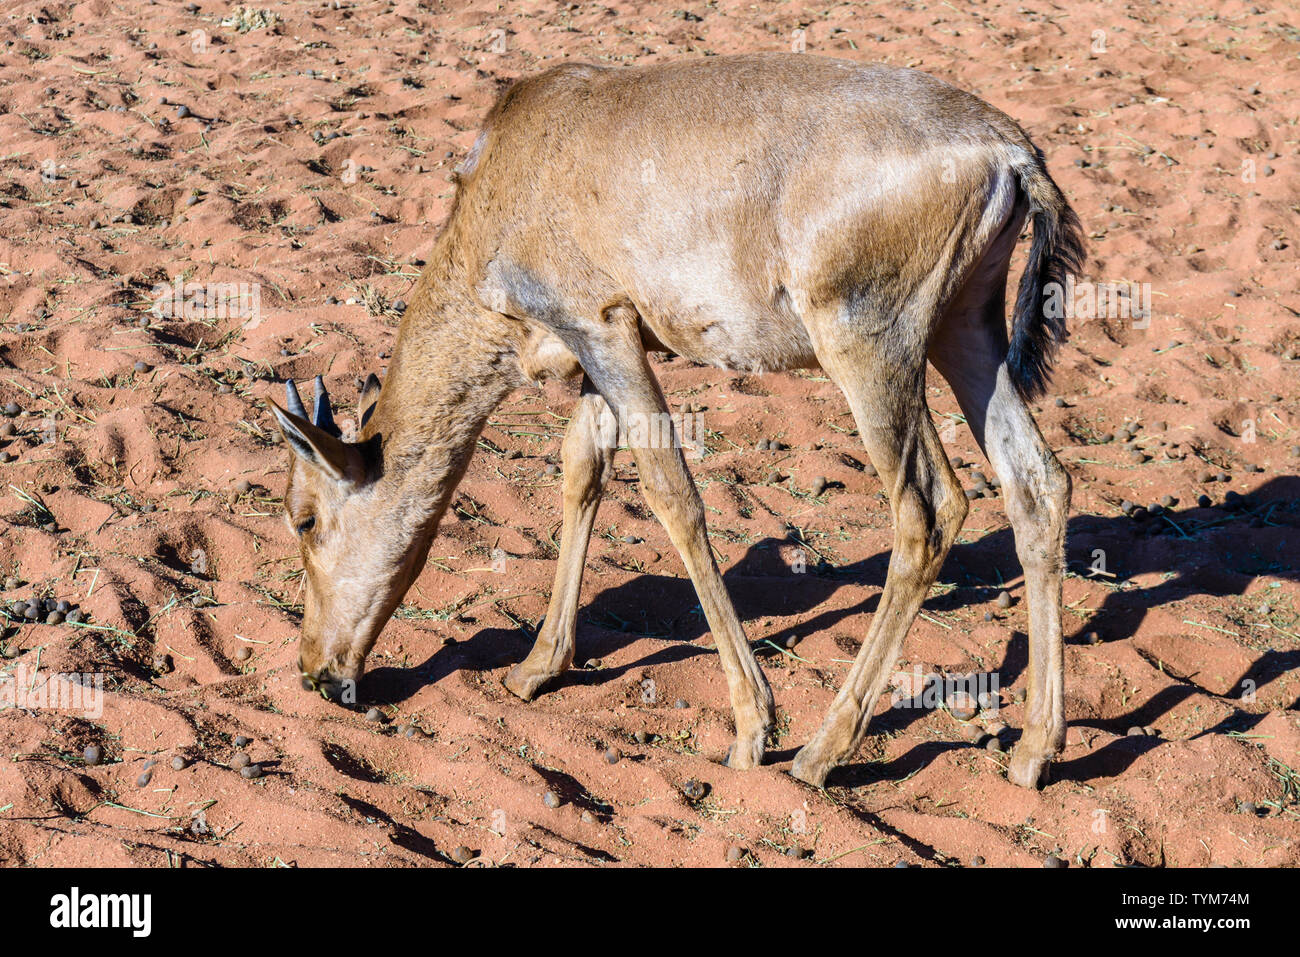 Young hartebeest foraging for food on the edge of the Namib desert, Namibia Stock Photo